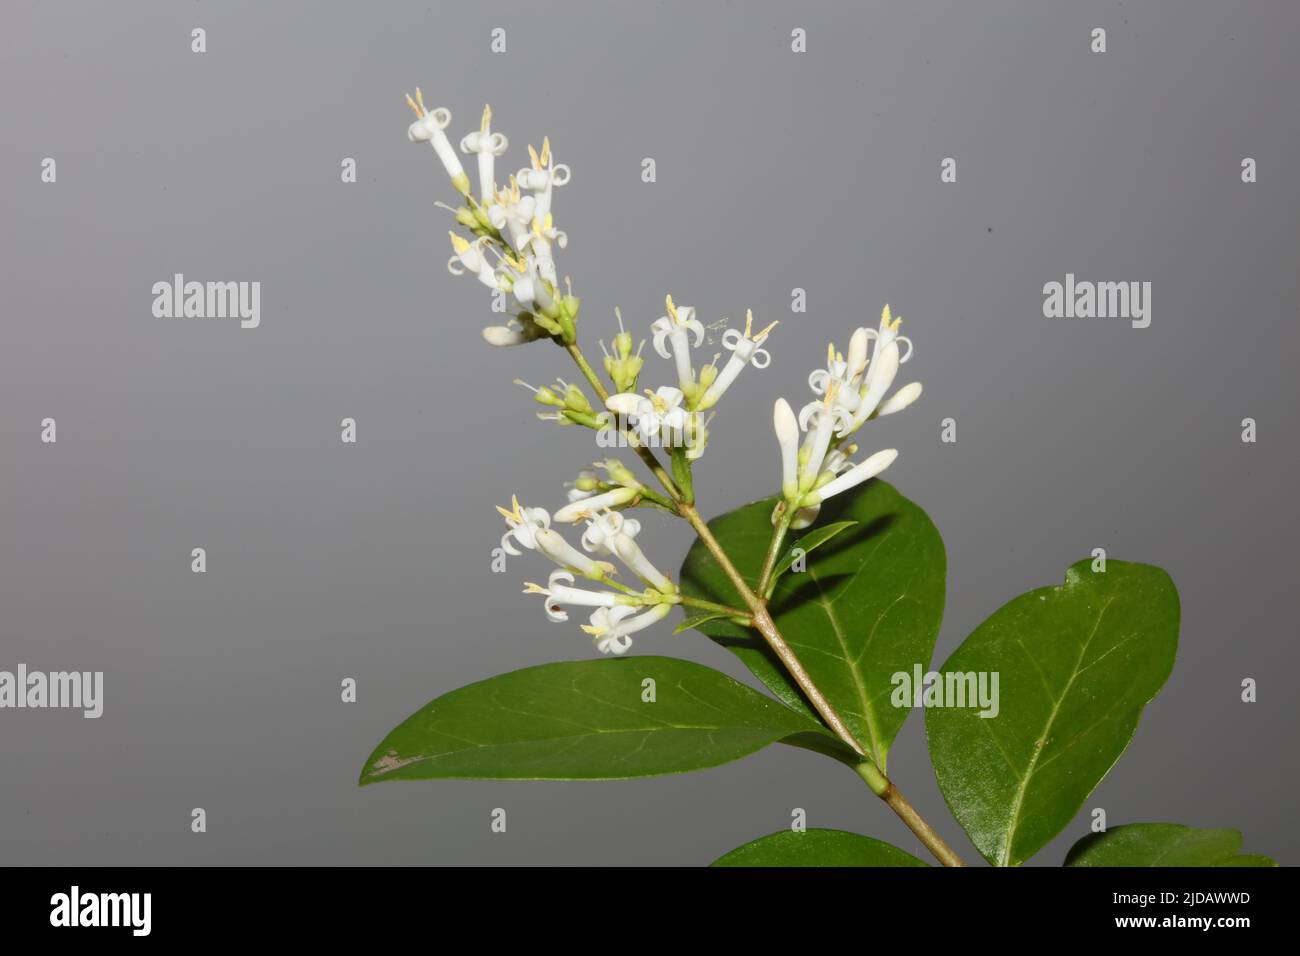 White flower blossom close up botanical modern background ligustrum vulgare family oleaceae big size high quality prints wall poster Stock Photo